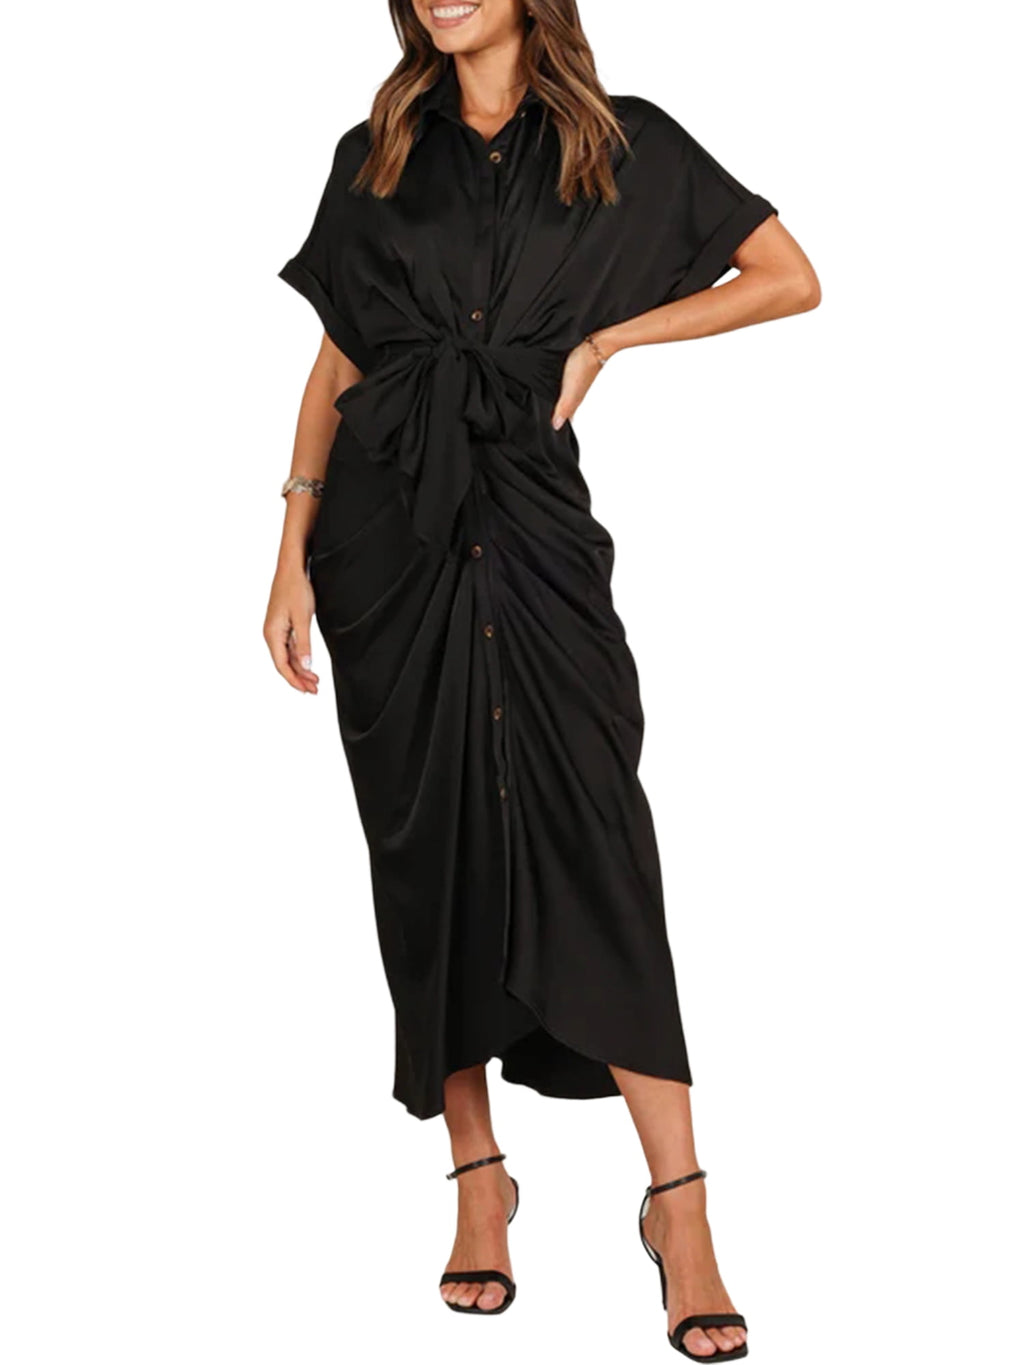 Hanerdun Women Button Down Ruched Shirt Dresses V Neck Belted Party Maxi Satin Dress Black S - image 1 of 5